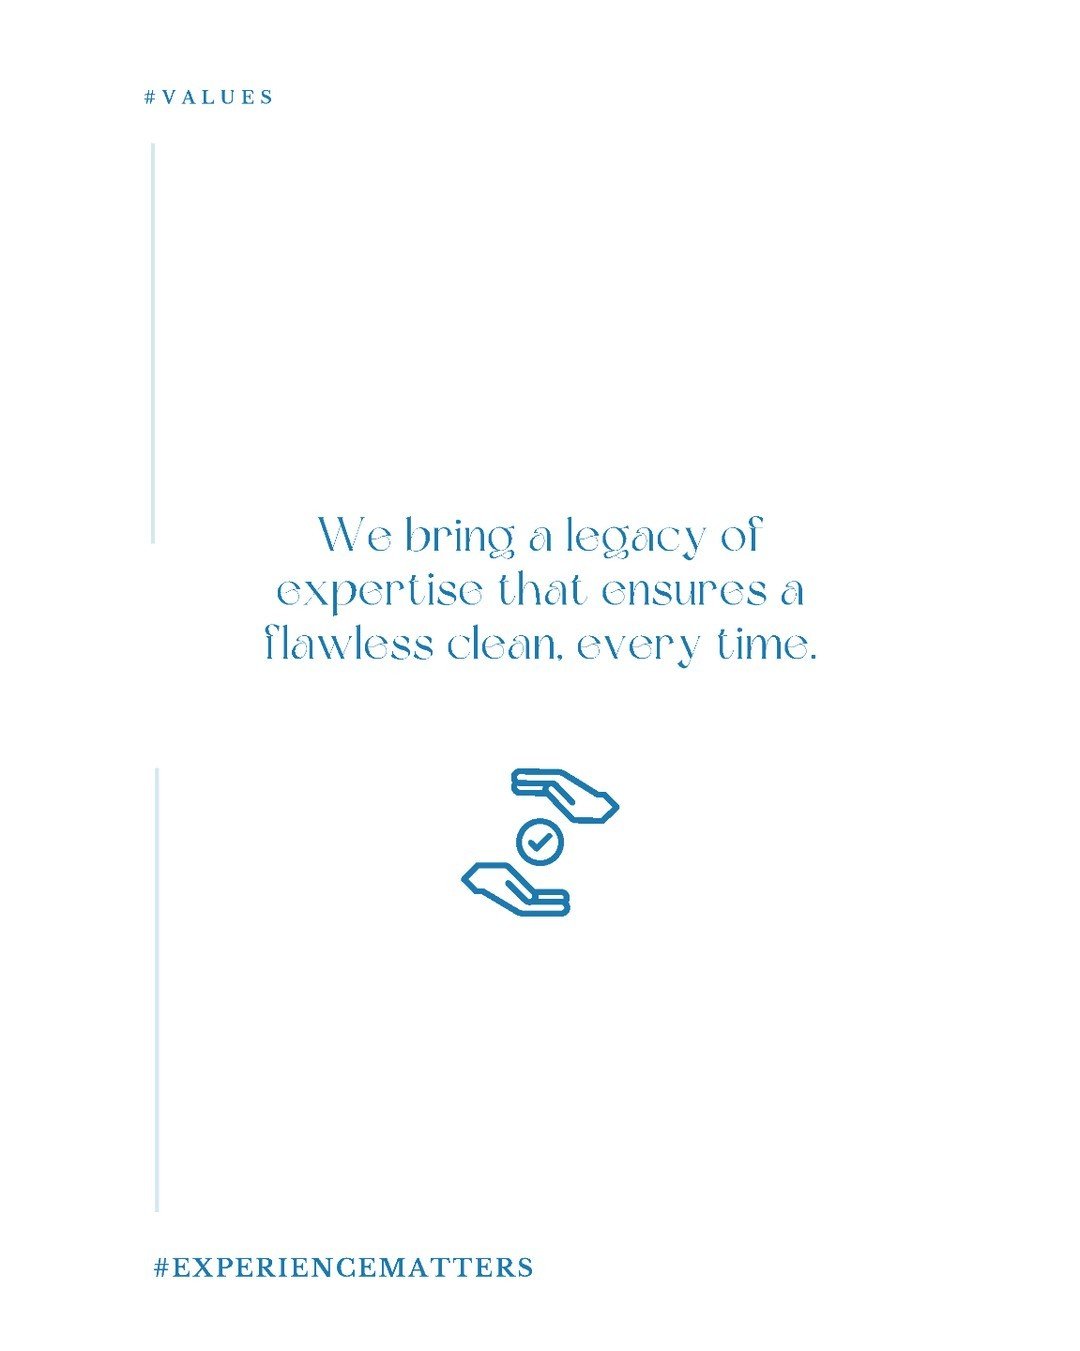 More Than Just Cleaning: Experience You Can Trust💫
#baysideafterbuildcleaning 

At Bayside Cleaning, we offer more than just a service.
We bring a legacy of expertise that ensures a flawless clean, every time.💙
 #ExperienceMatters #AfterBuildCleani